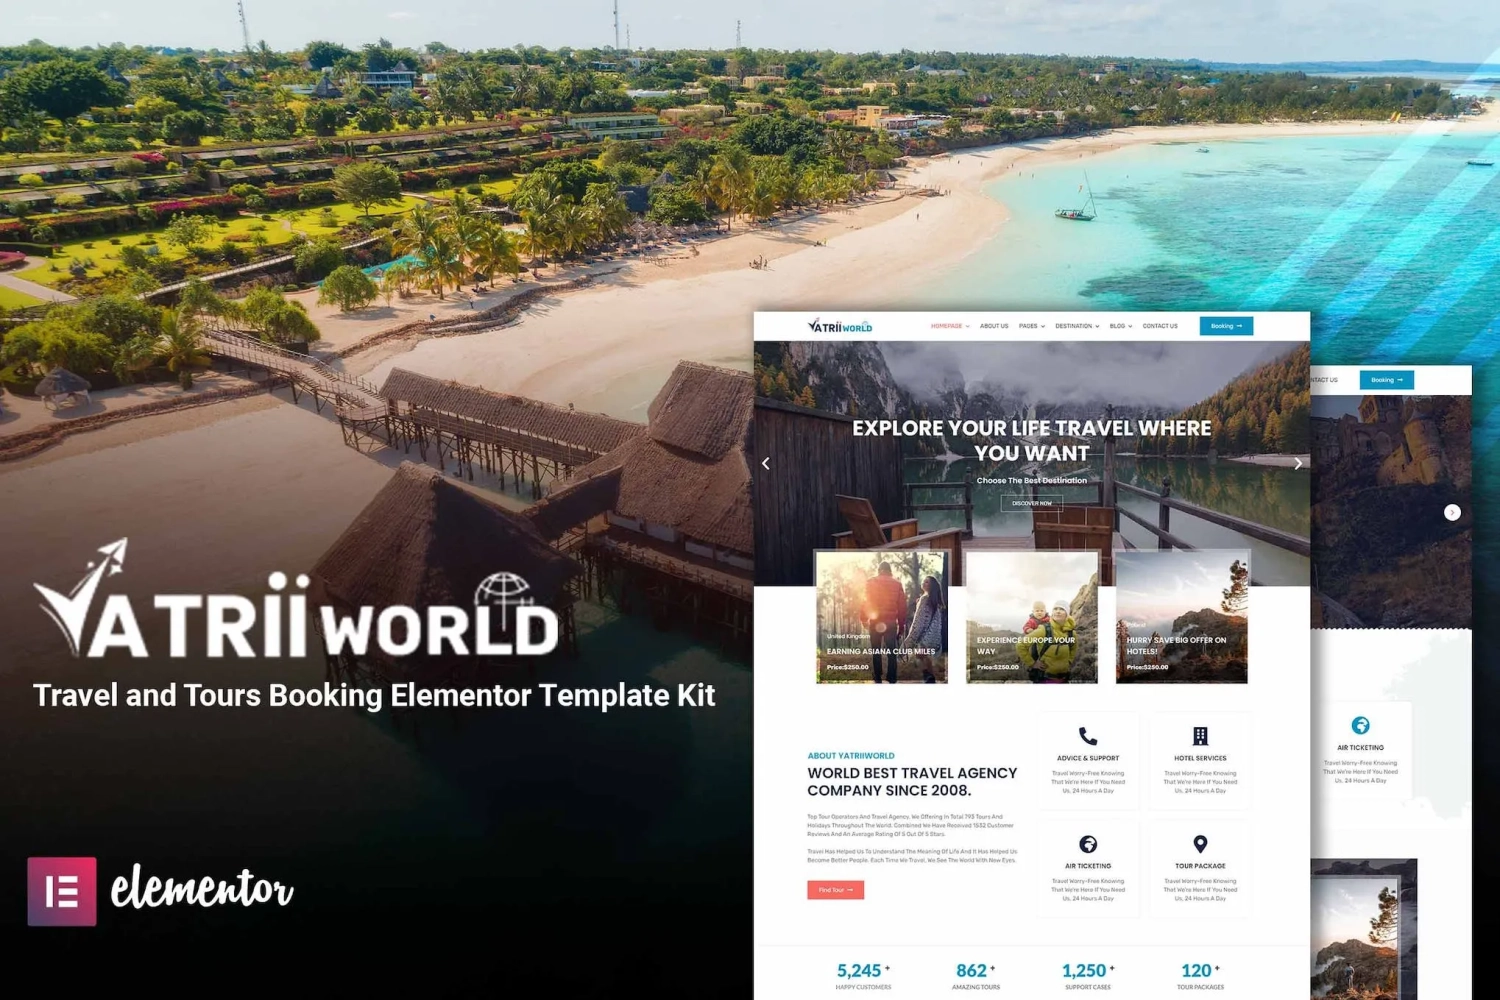 Yatriiworld Travel And Tours Booking Elementor Template Kit 40 1697618592 1